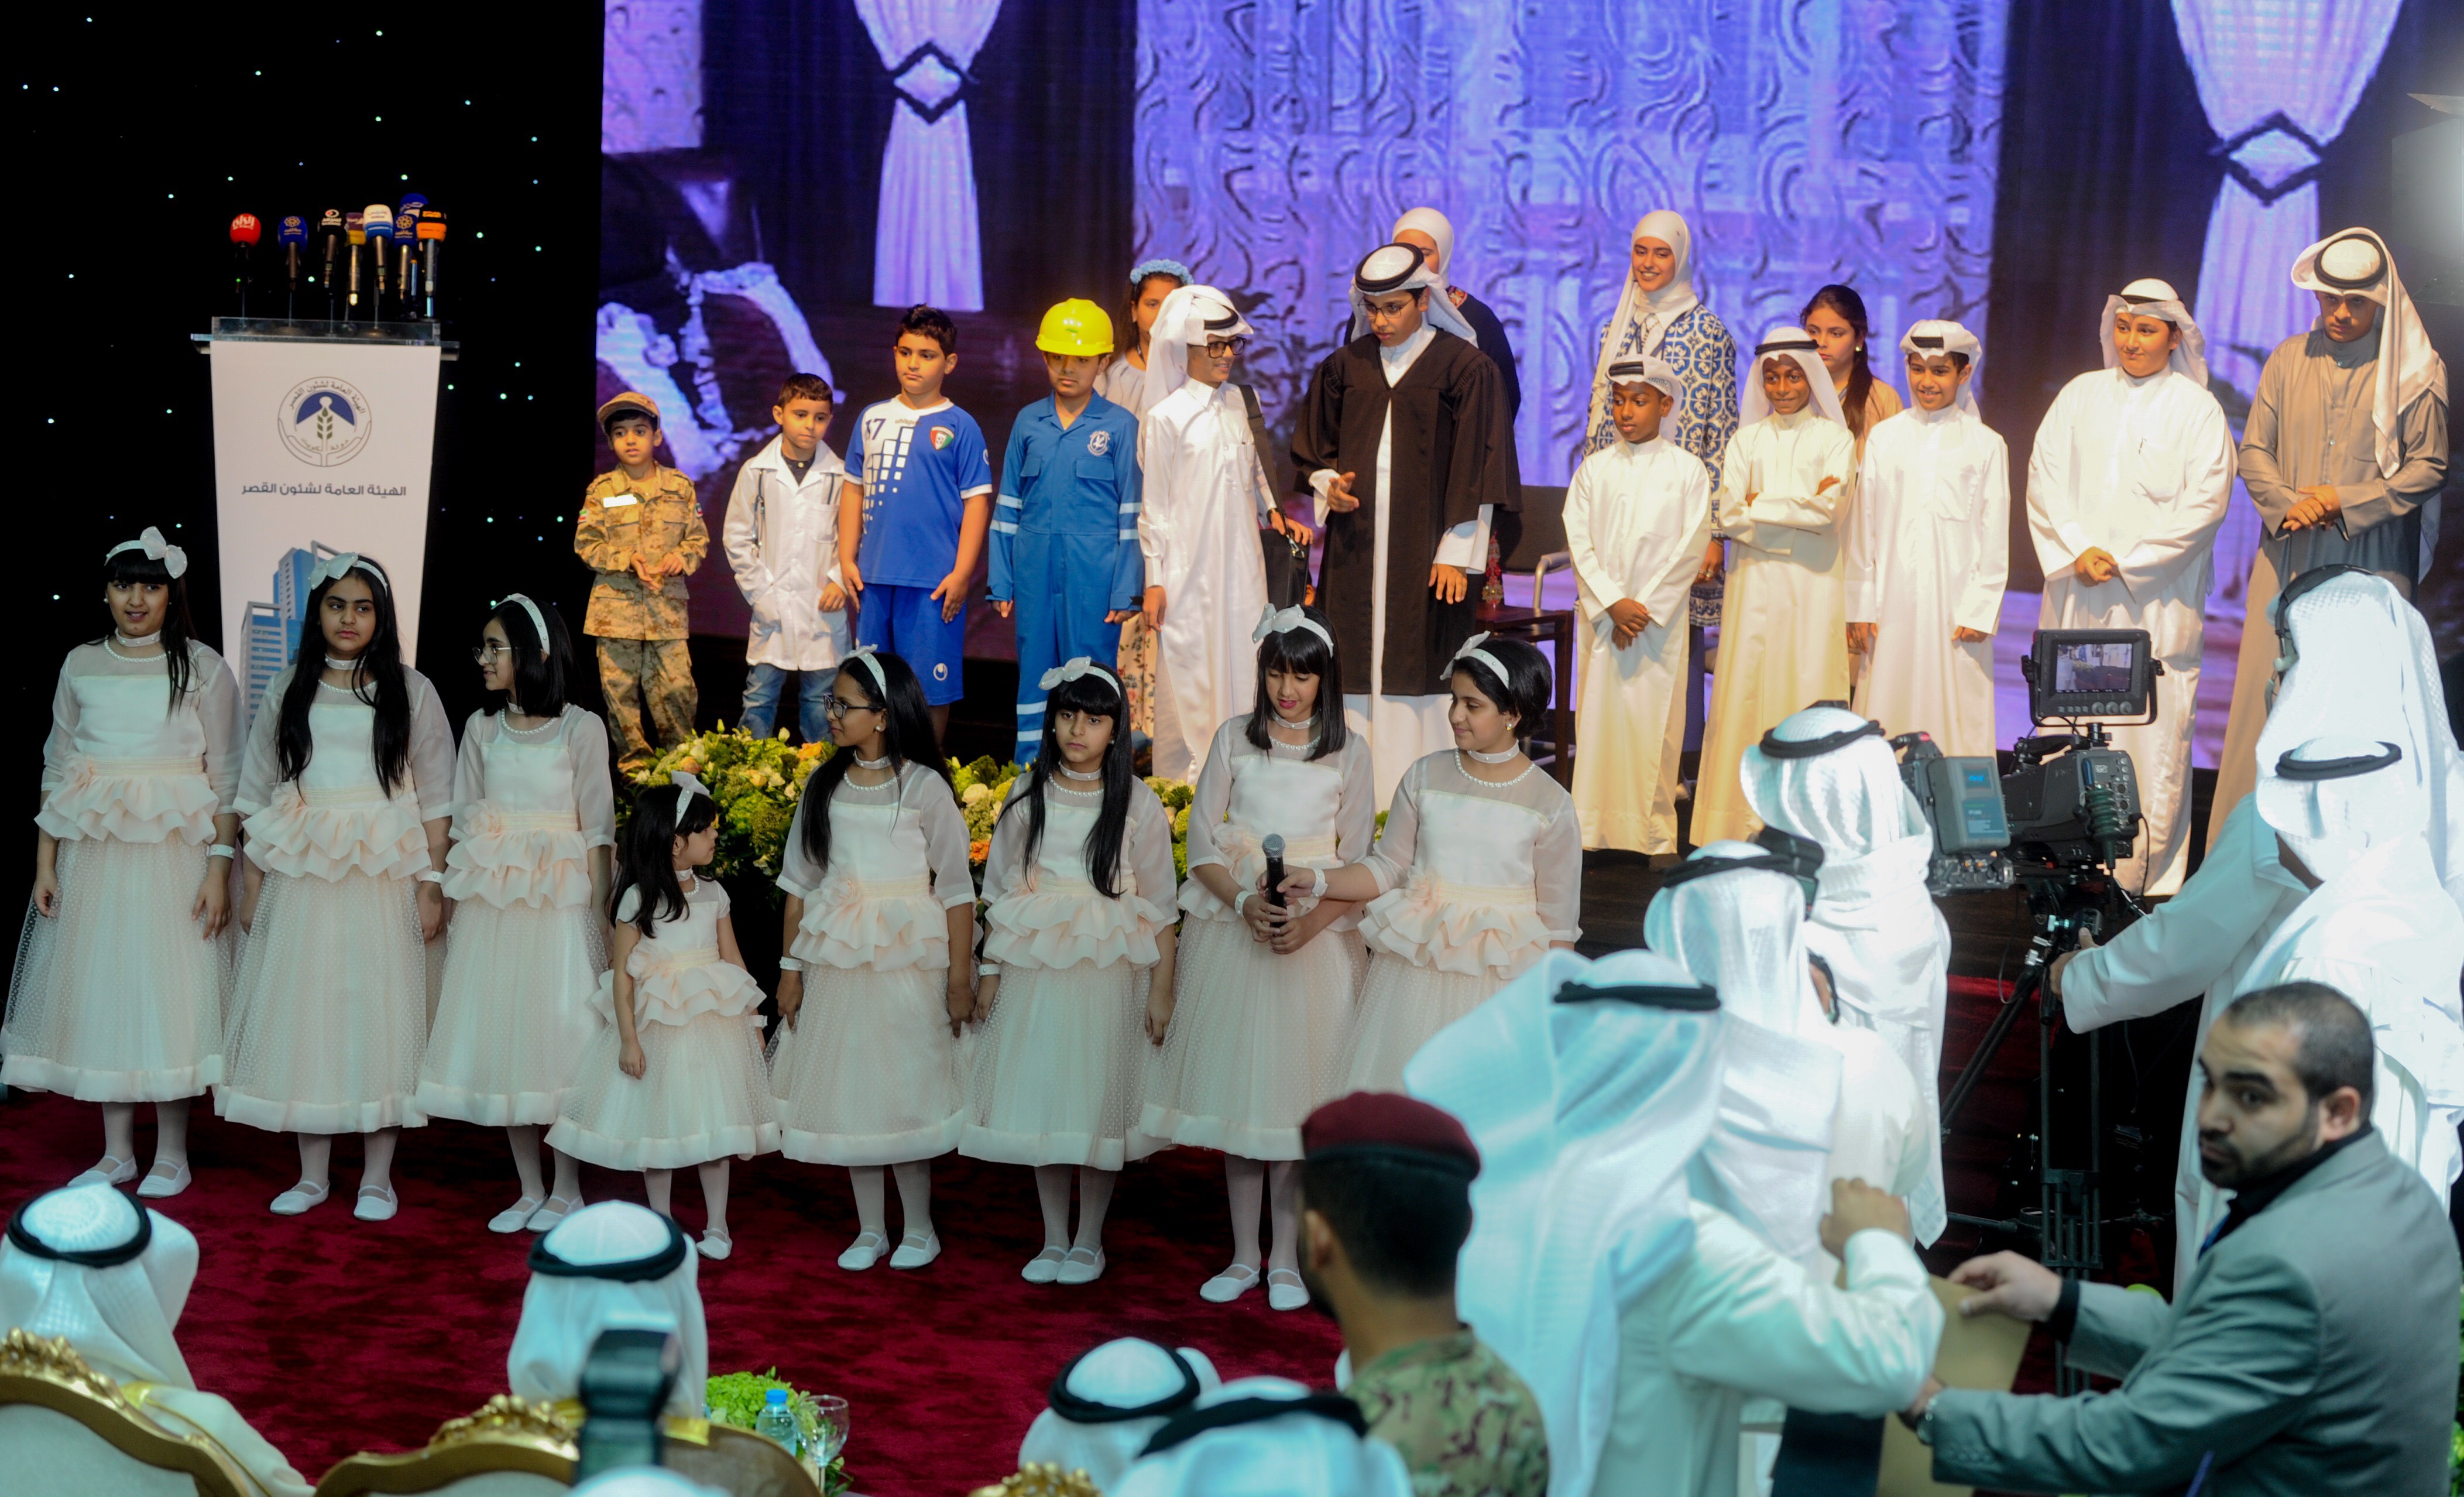 The opening ceremony of launching the new building of Public Authority for Minors Affairs (PAMA) was held on Tuesday under the auspices of His Highness the Amir Sheikh Sabah Al-Ahmad Al-Jaber Al-Sabah.